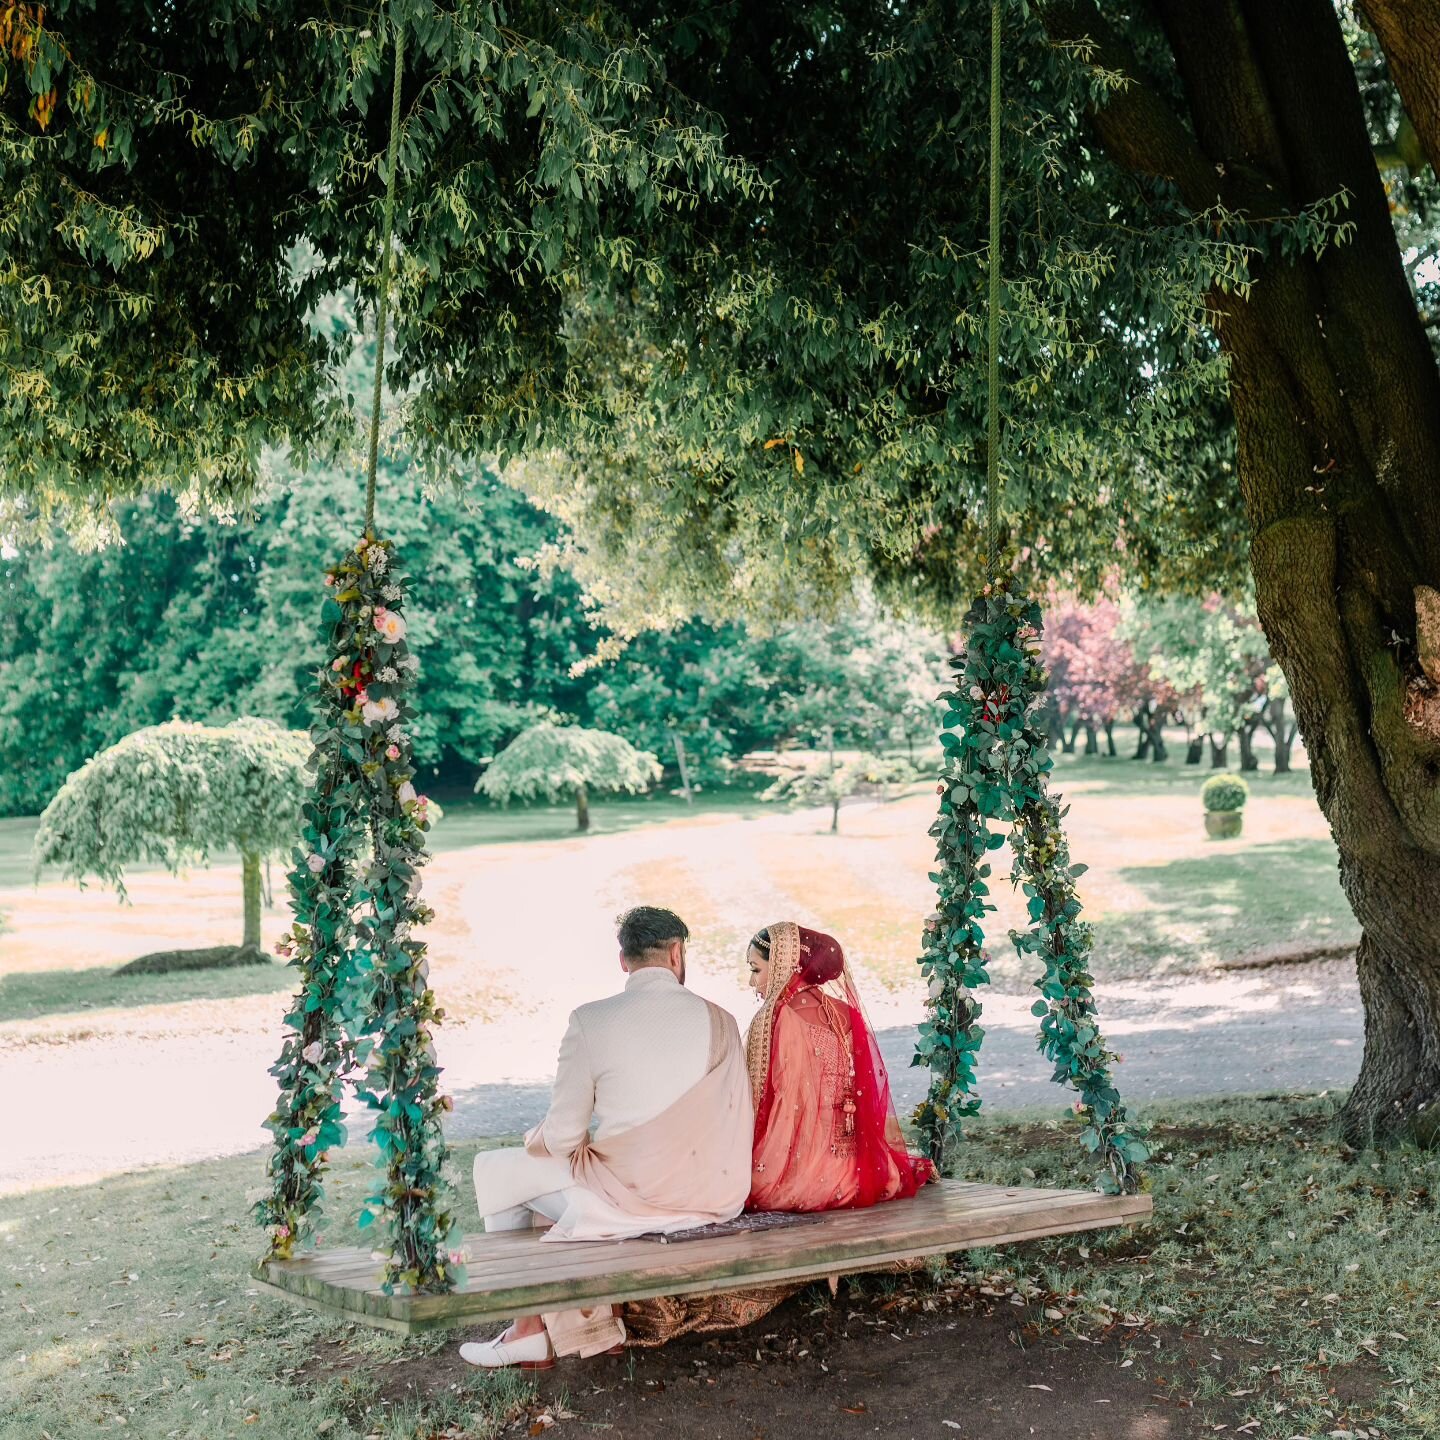 This location was amazing. So magical ❤️

Get in touch for bookings 24/25

.
.
.
.
.
.
.
#bride #wedding #weddingidea #weddinginspiration #weddings #weddingphotography #weddingportrait #weddingphotographer #portraits #portraits #indianwedding #asianw